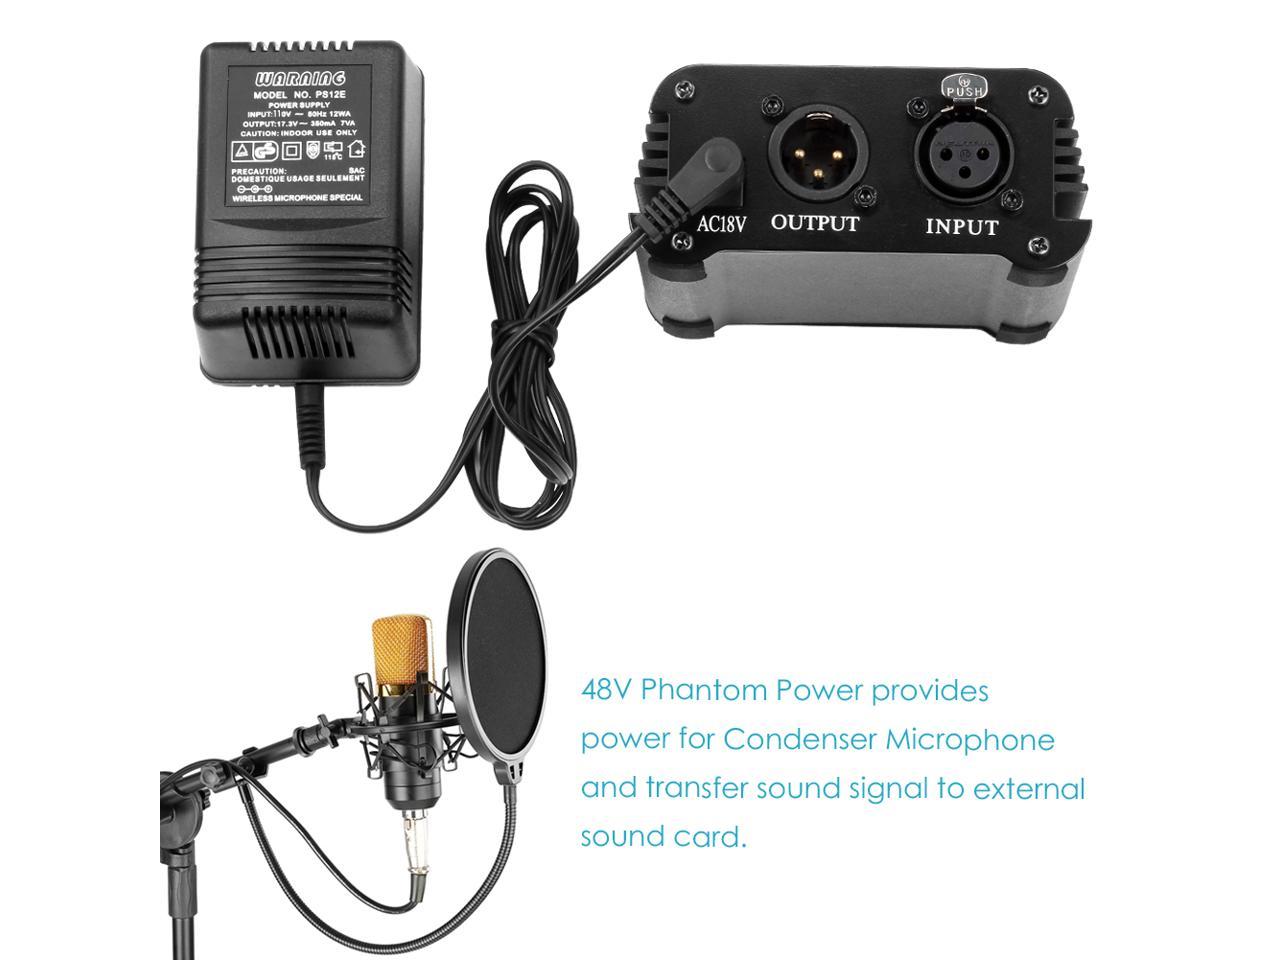 XLR Audio Cable+ Power Adapter+ 1 NW-700 Condenser Microphone+ Shock Mount+ 1 1 1 Microphone Power Cable 1 1 1 48V Phantom Power+ Neewer Microphone & Phantom Power Kit: Anti-wind Foam Cap+ 